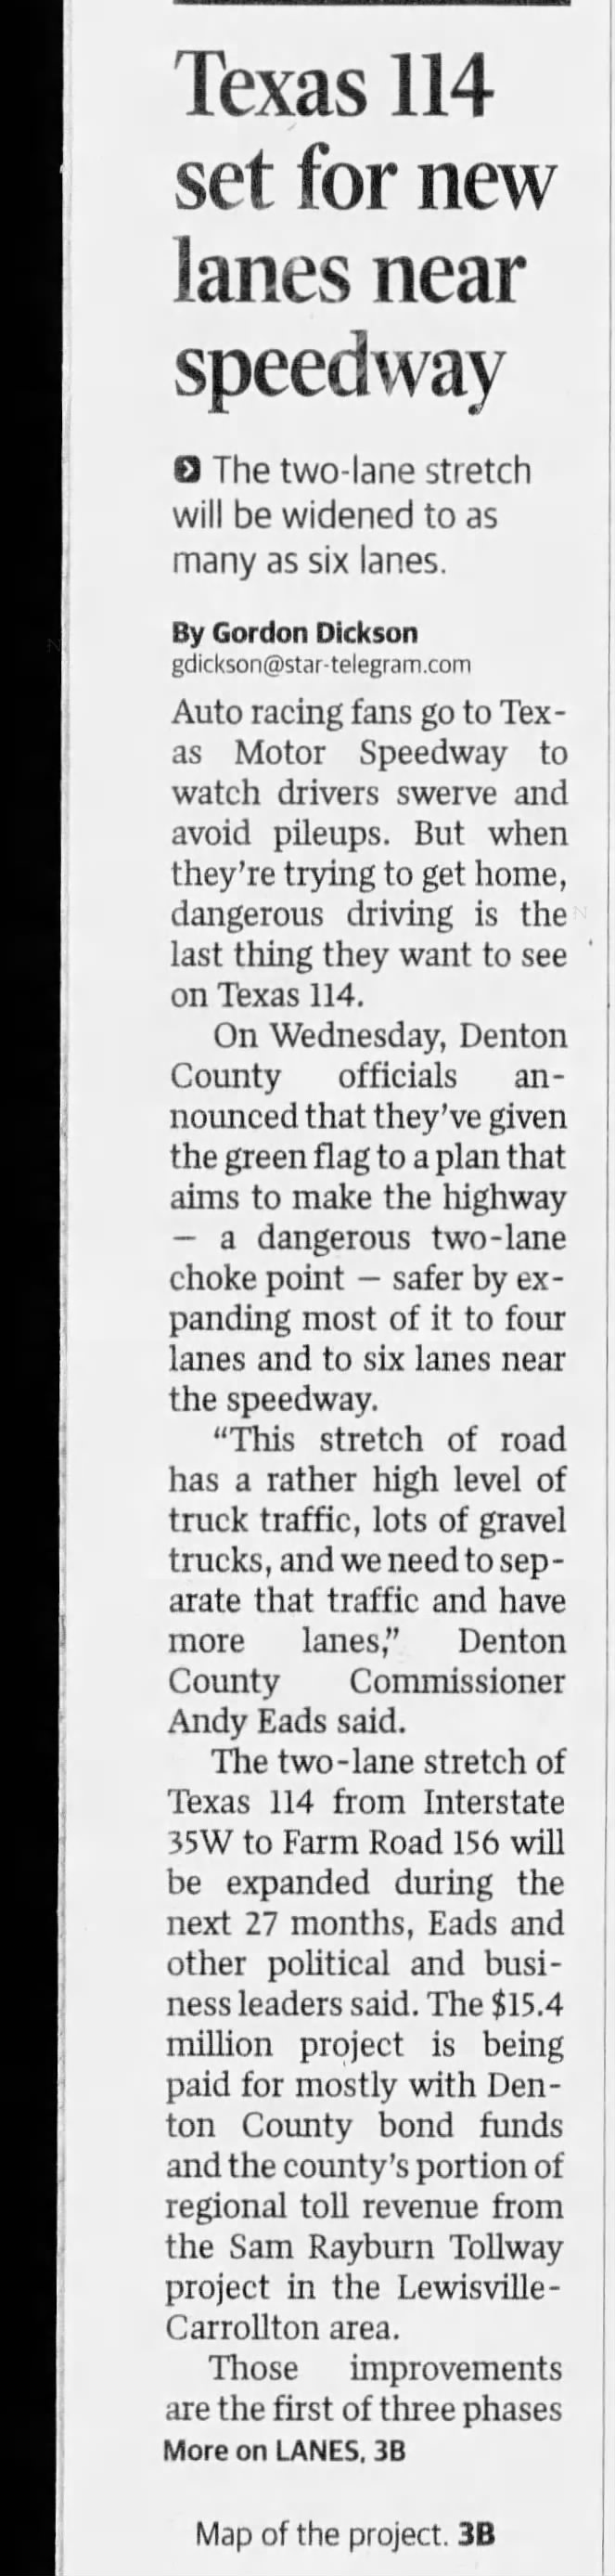 Texas 114 set for new lanes near speedway (Part 1)